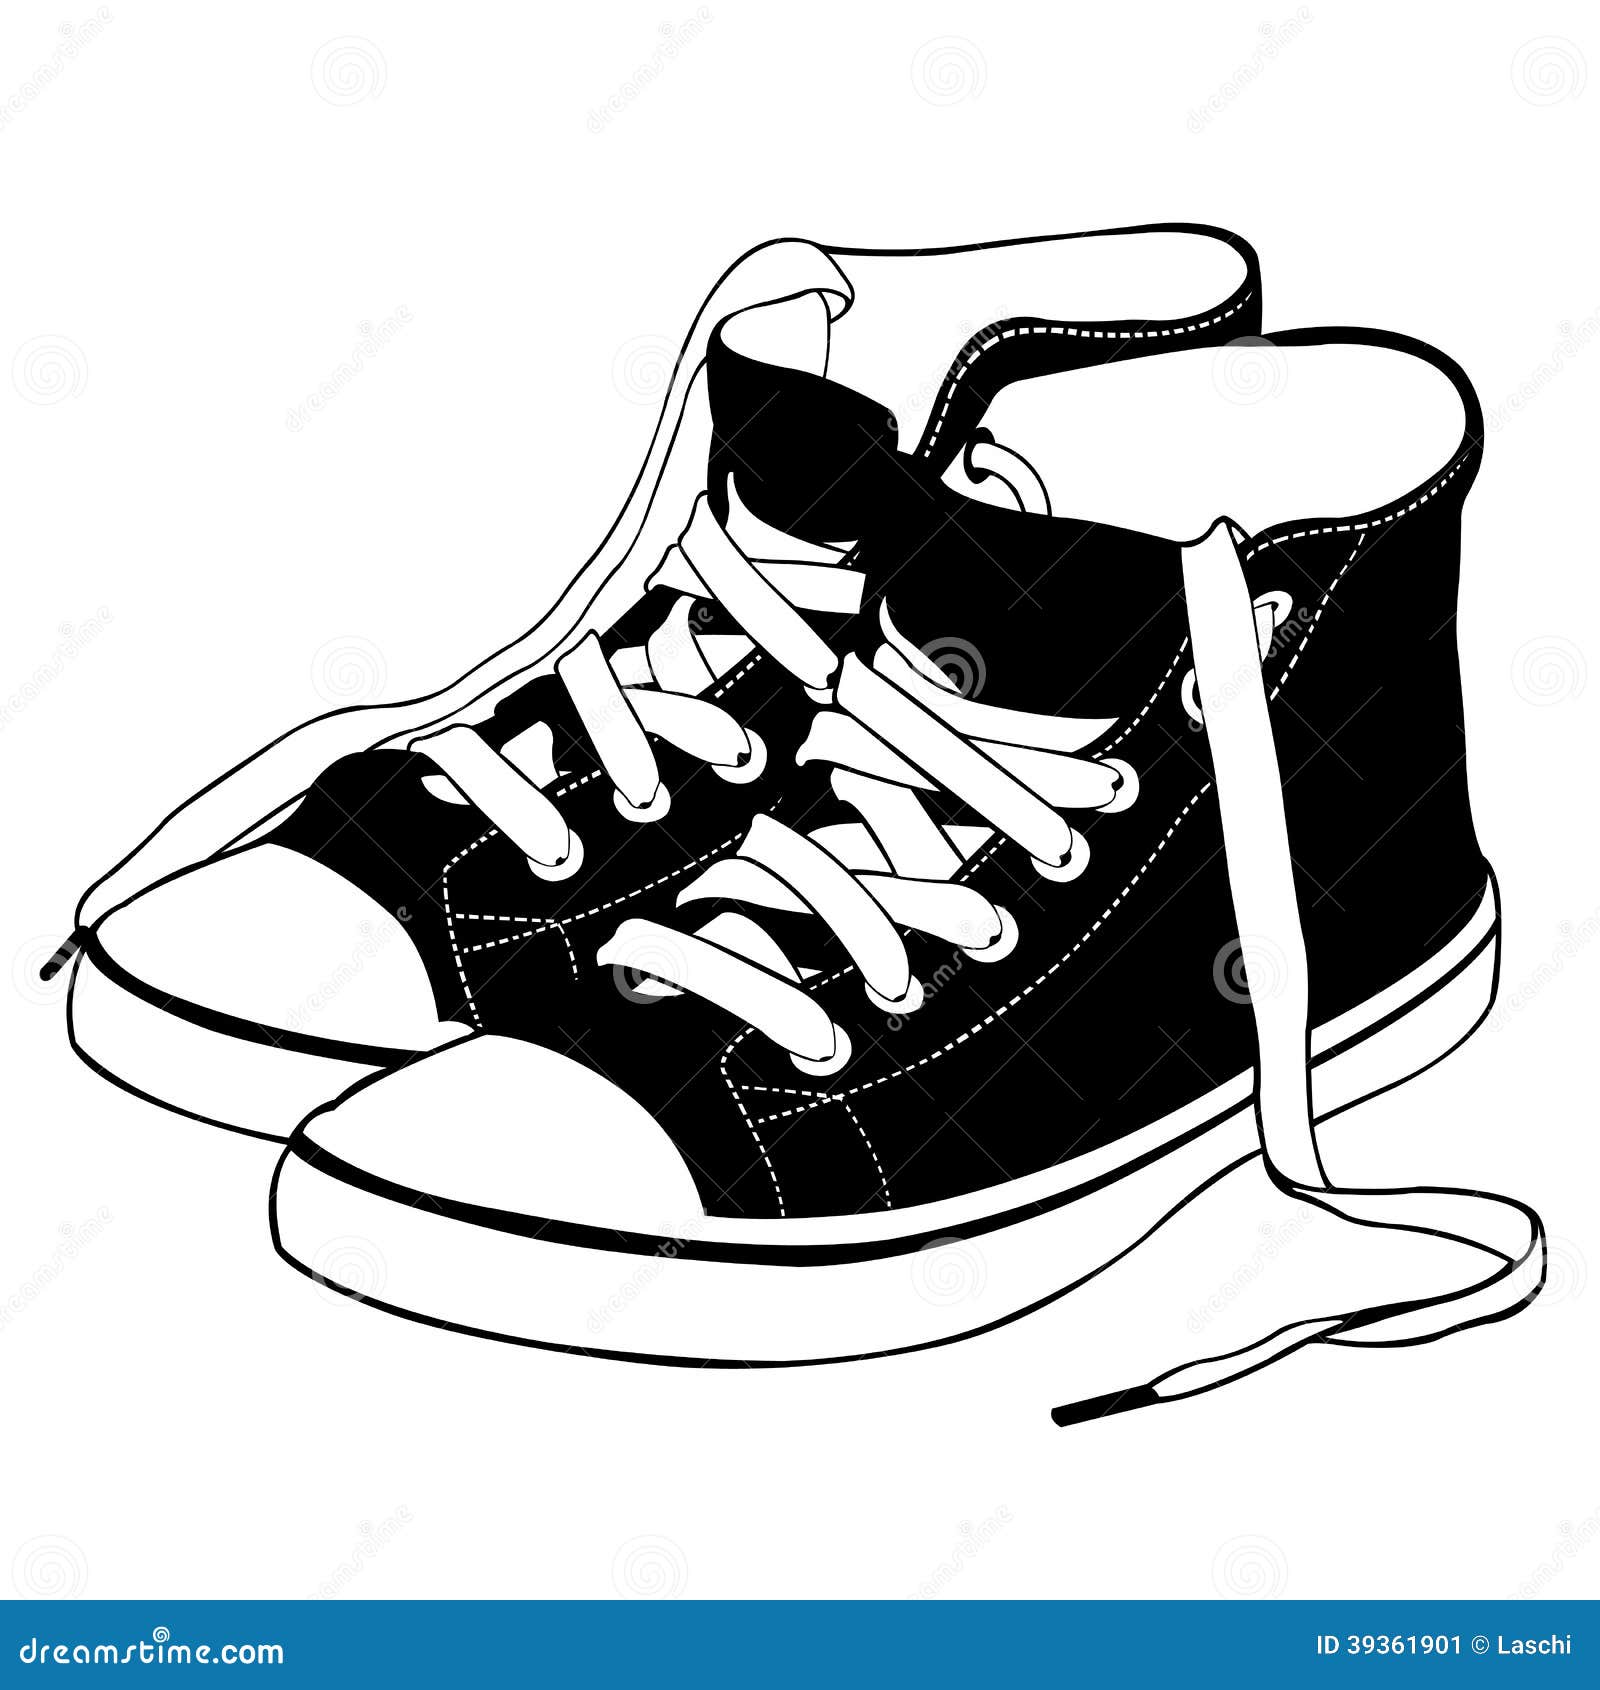 Shoes stock vector. Illustration of black, shoe, lace - 39361901